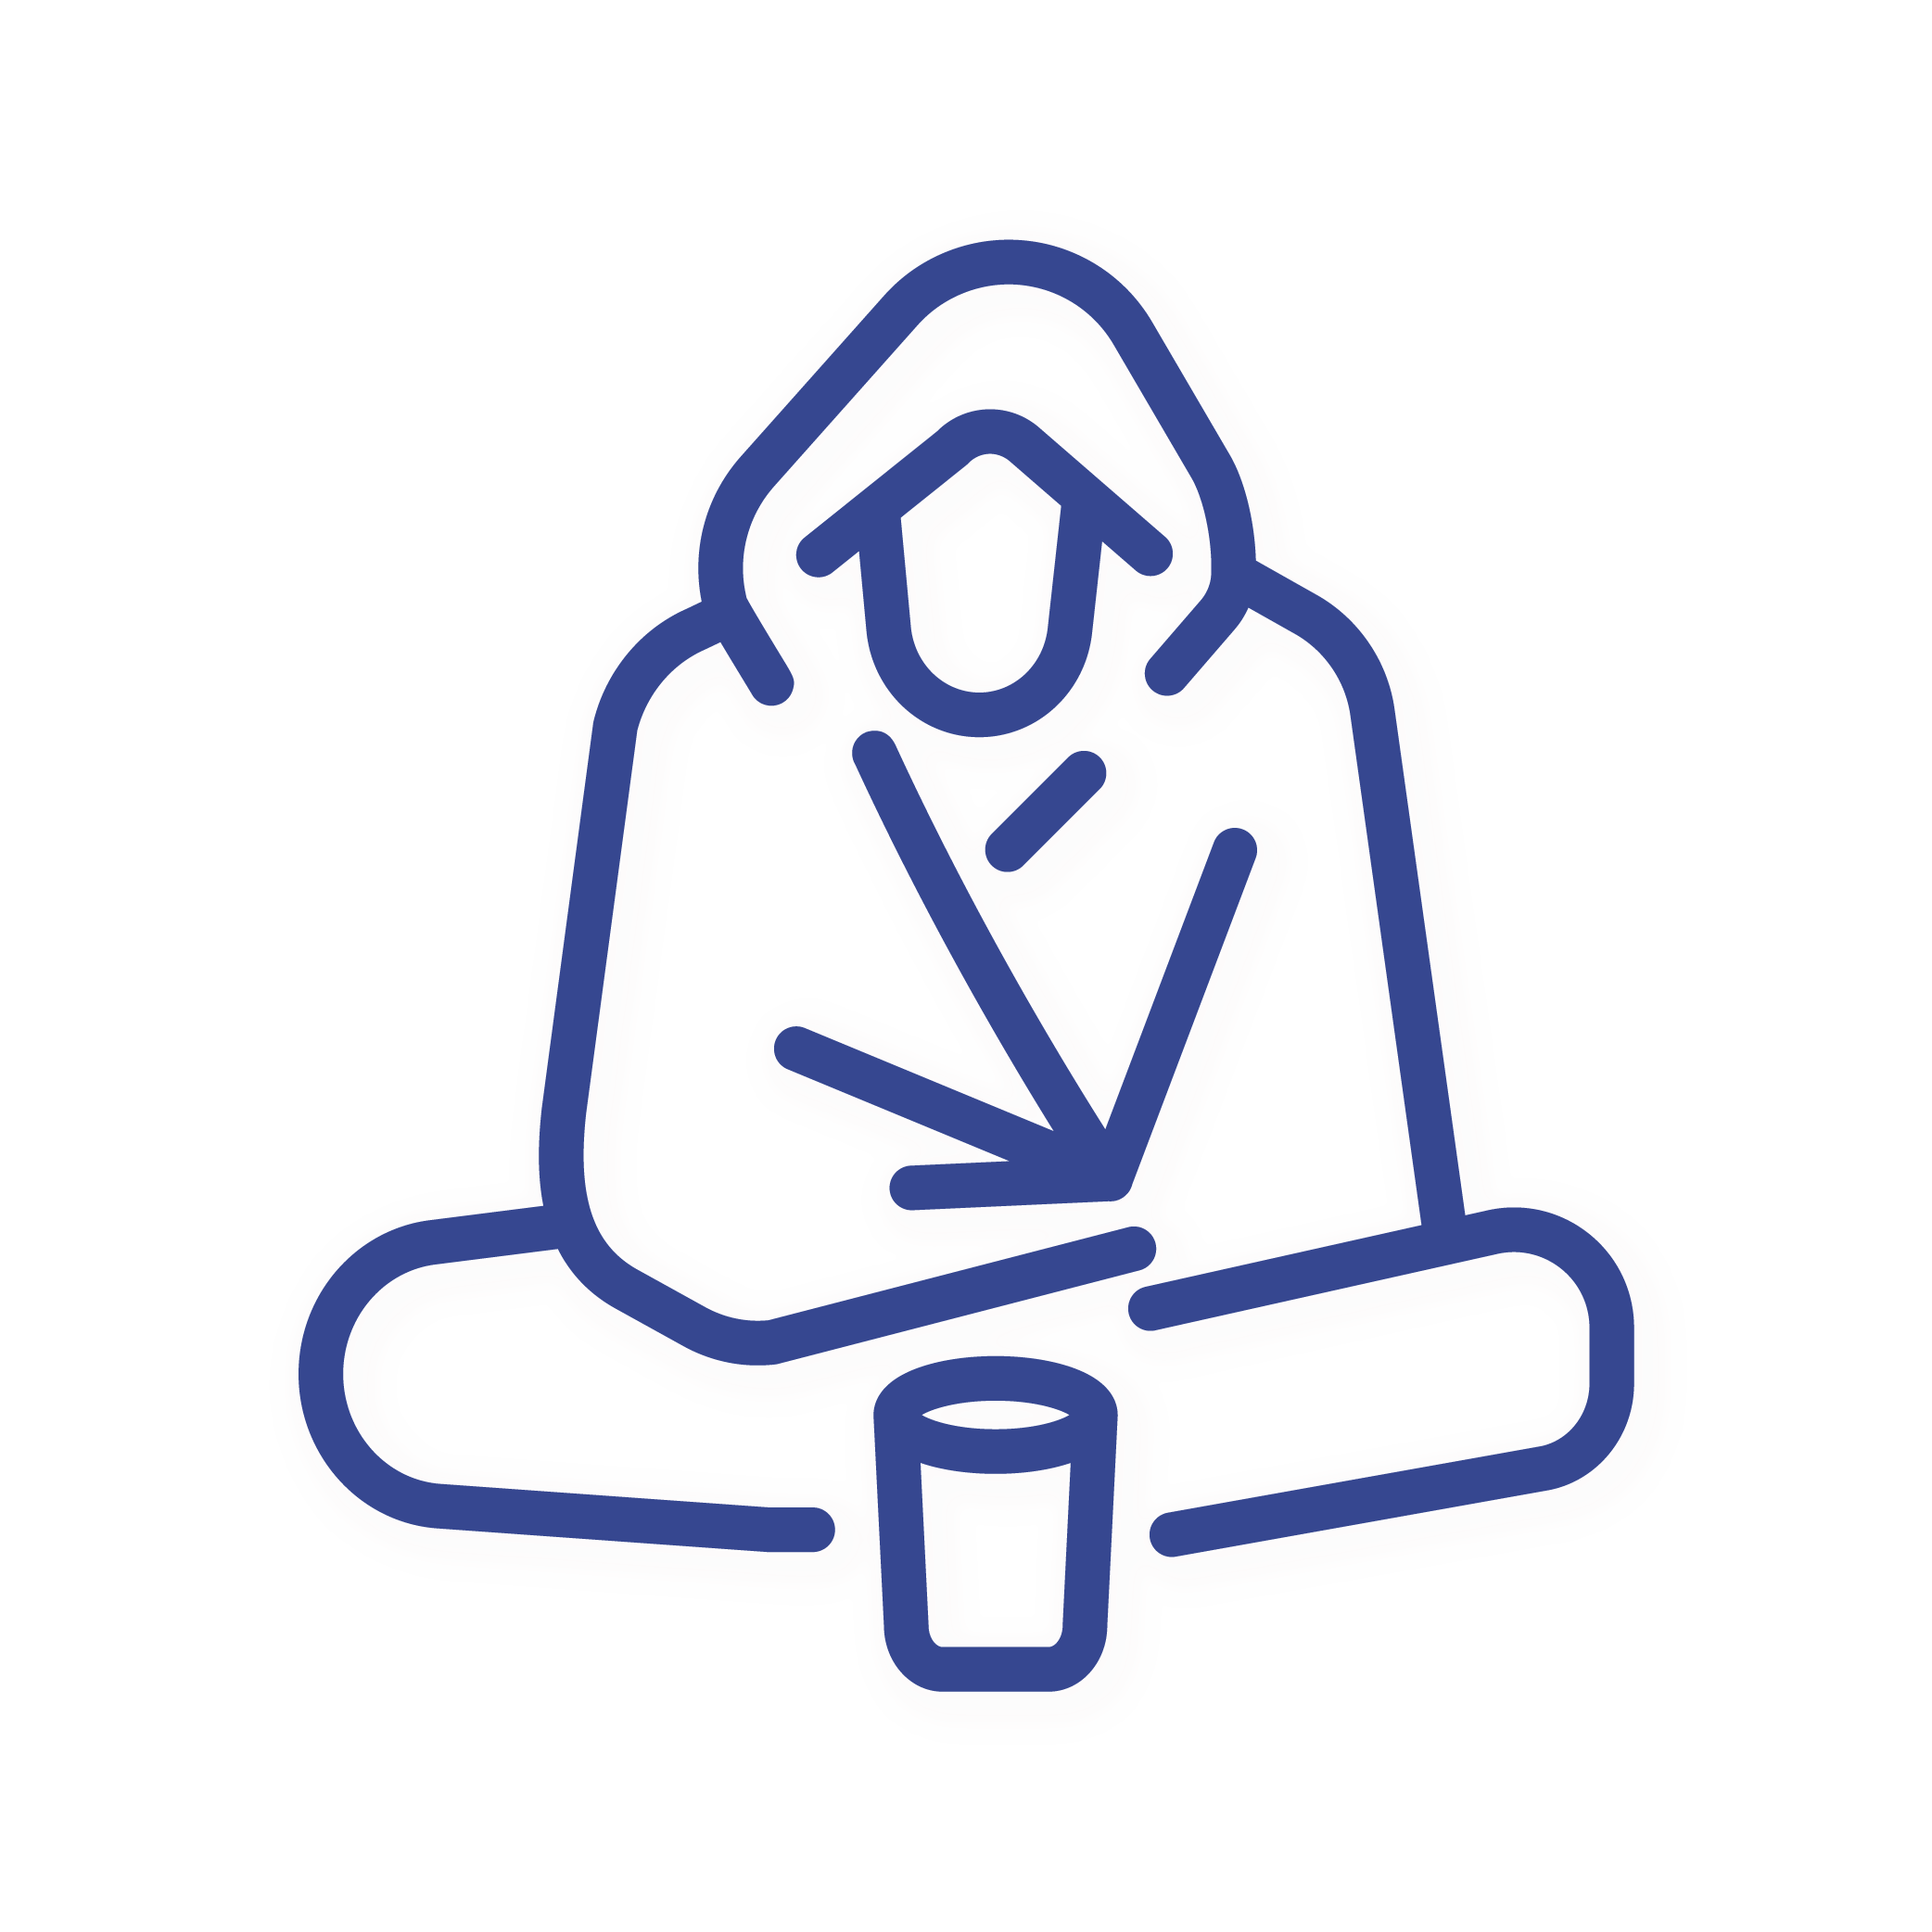 A blue line drawing, on a very light gray background, of a human figure sitting cross-legged facing the reader. The figure is wrapped in a blanket and has a cup in front of their legs. 